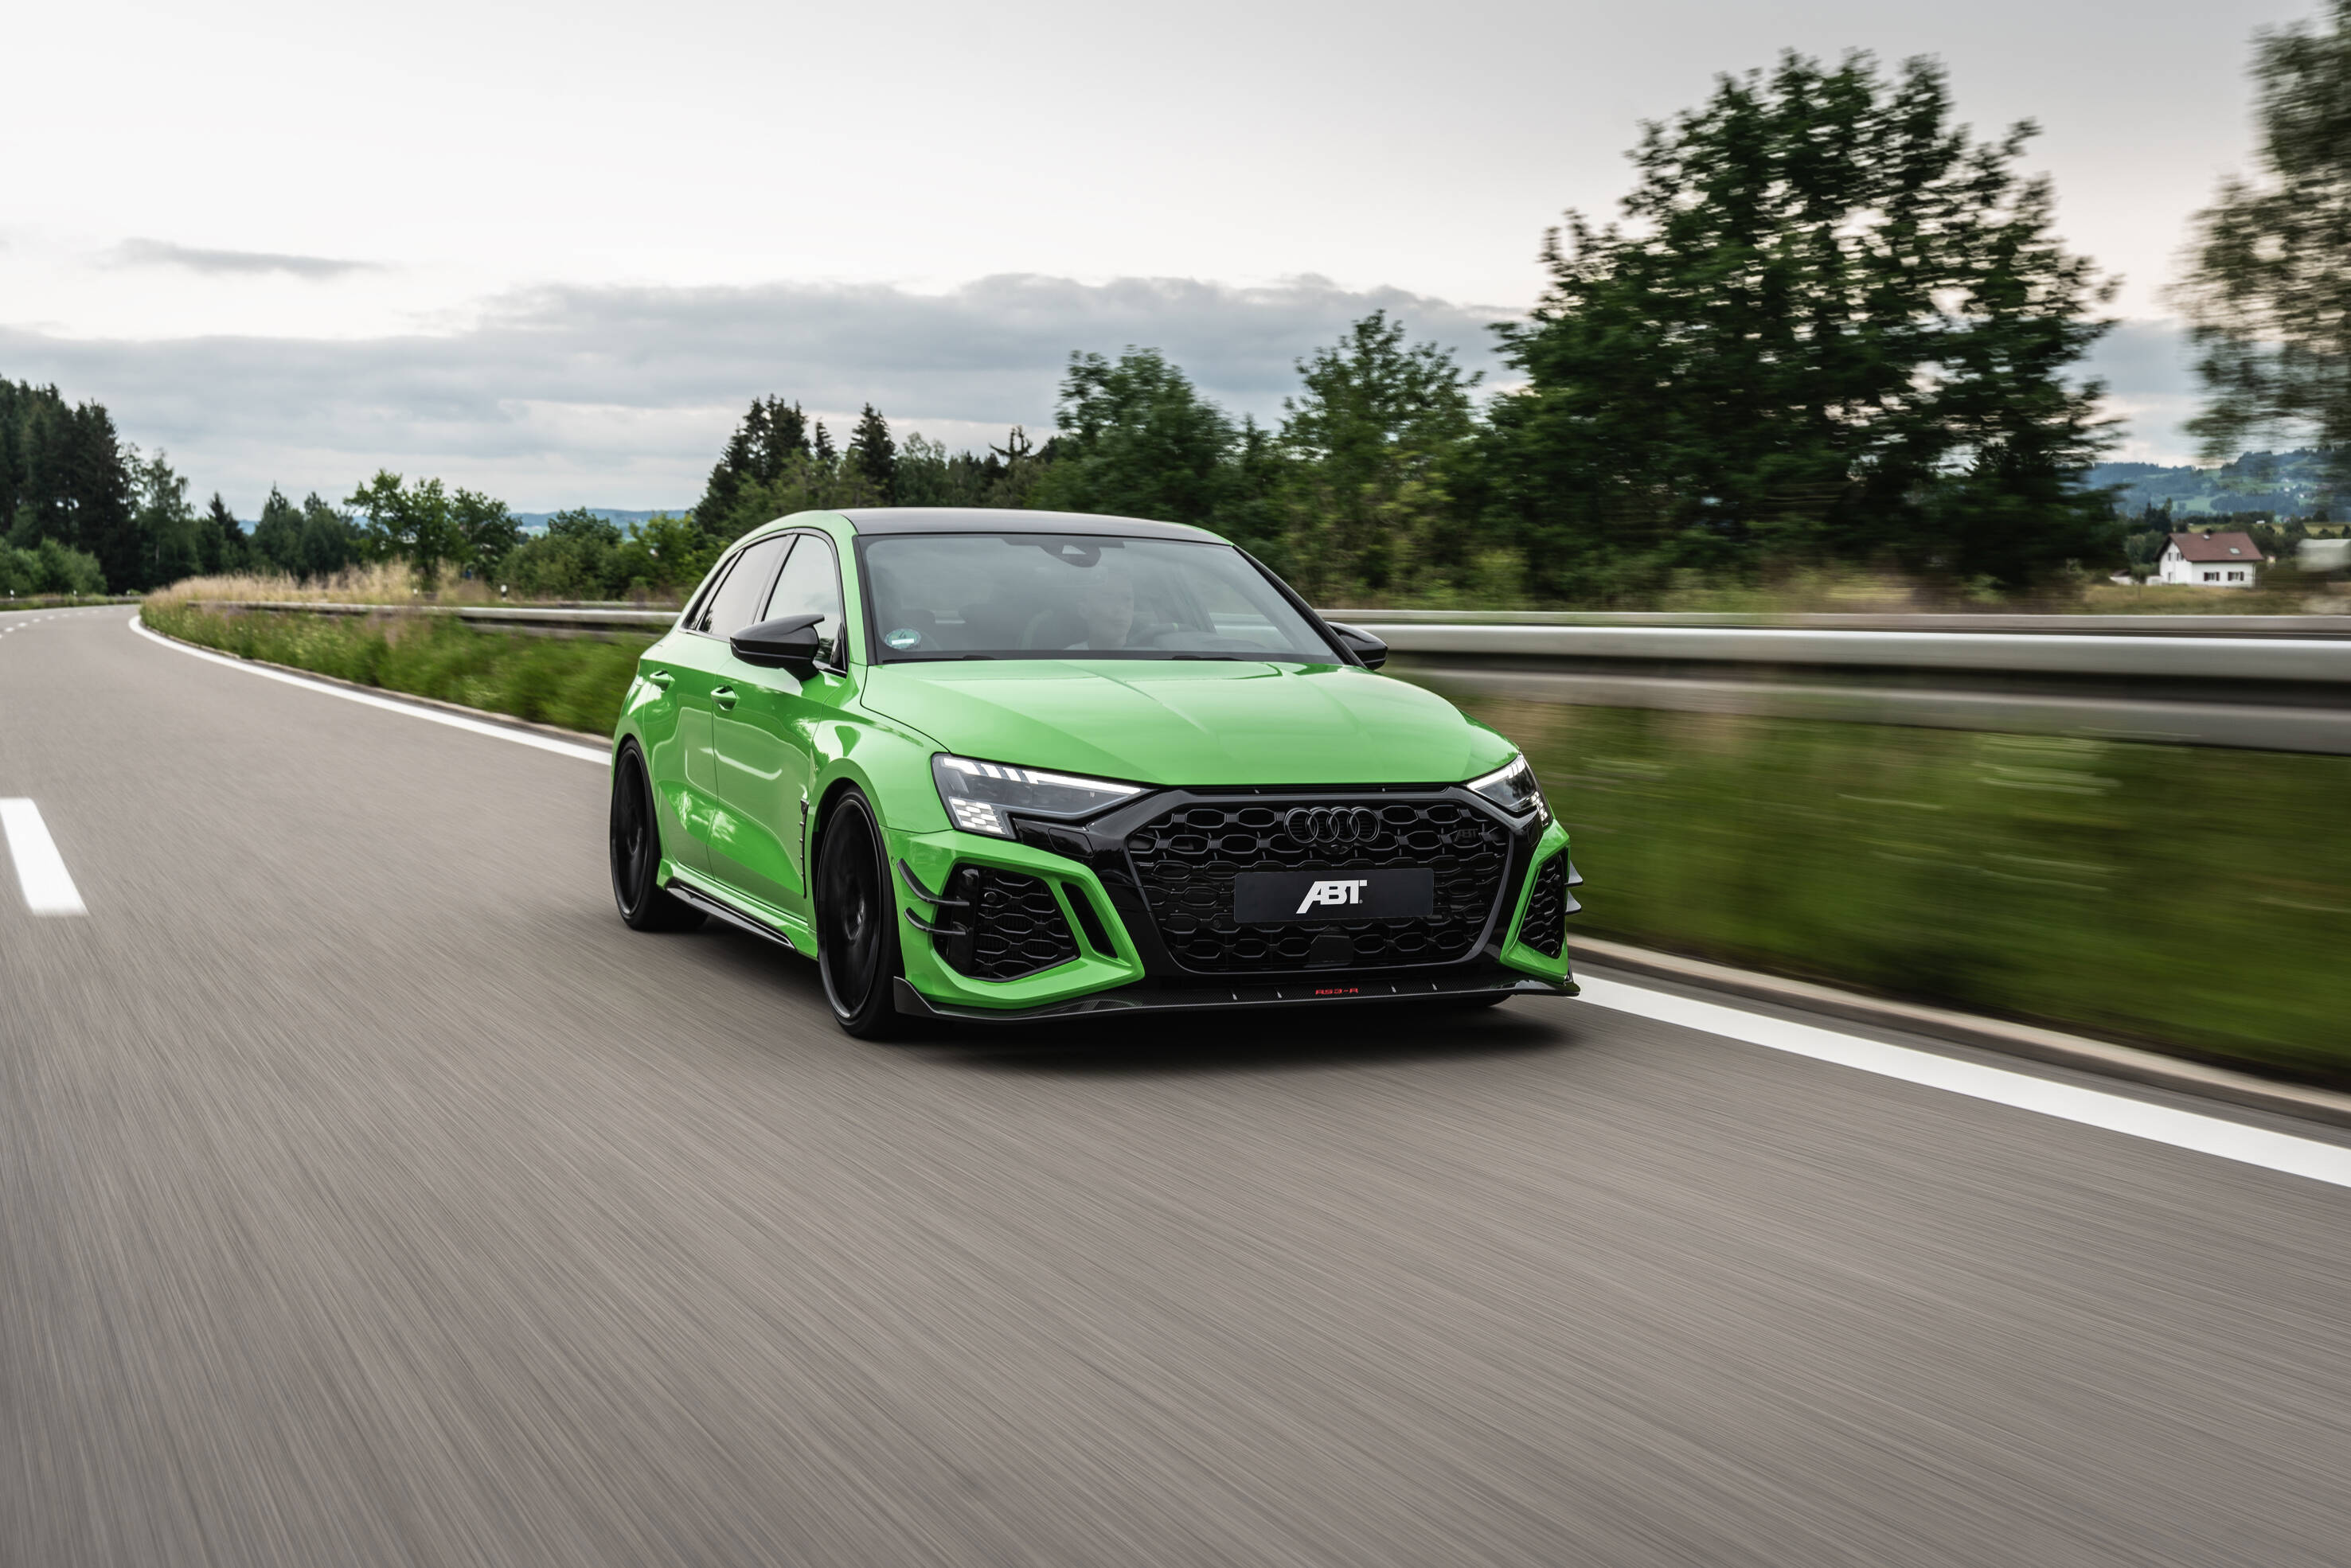 460 hp in the Audi RS3 Sportback